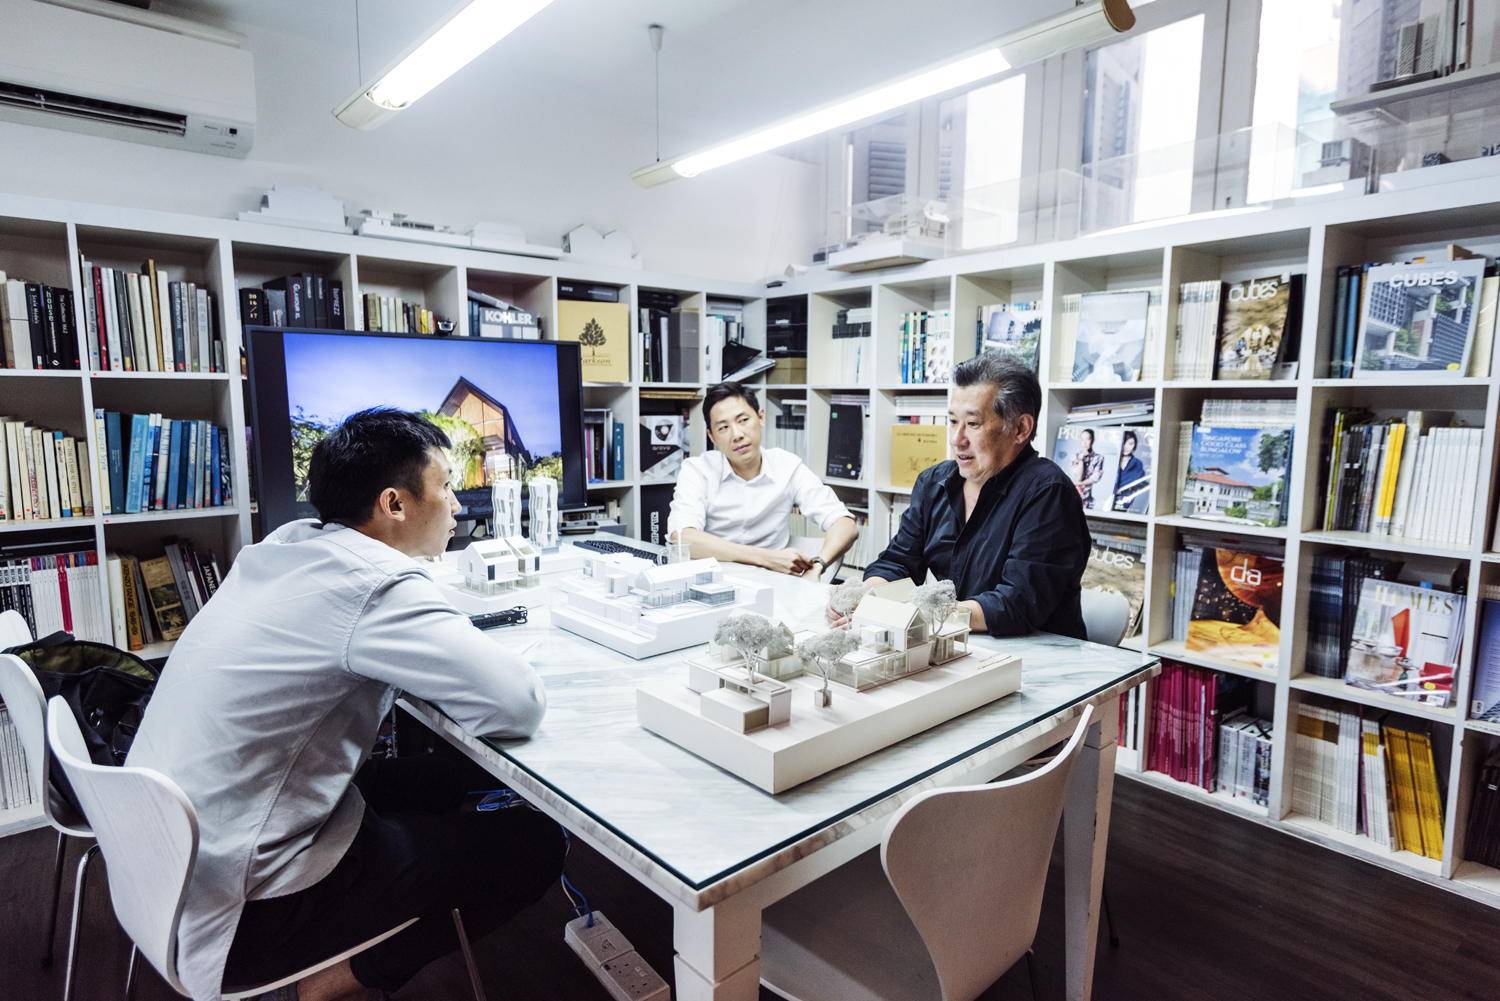 Architects Rene Tan and Jonathan Quek at the interview in their office